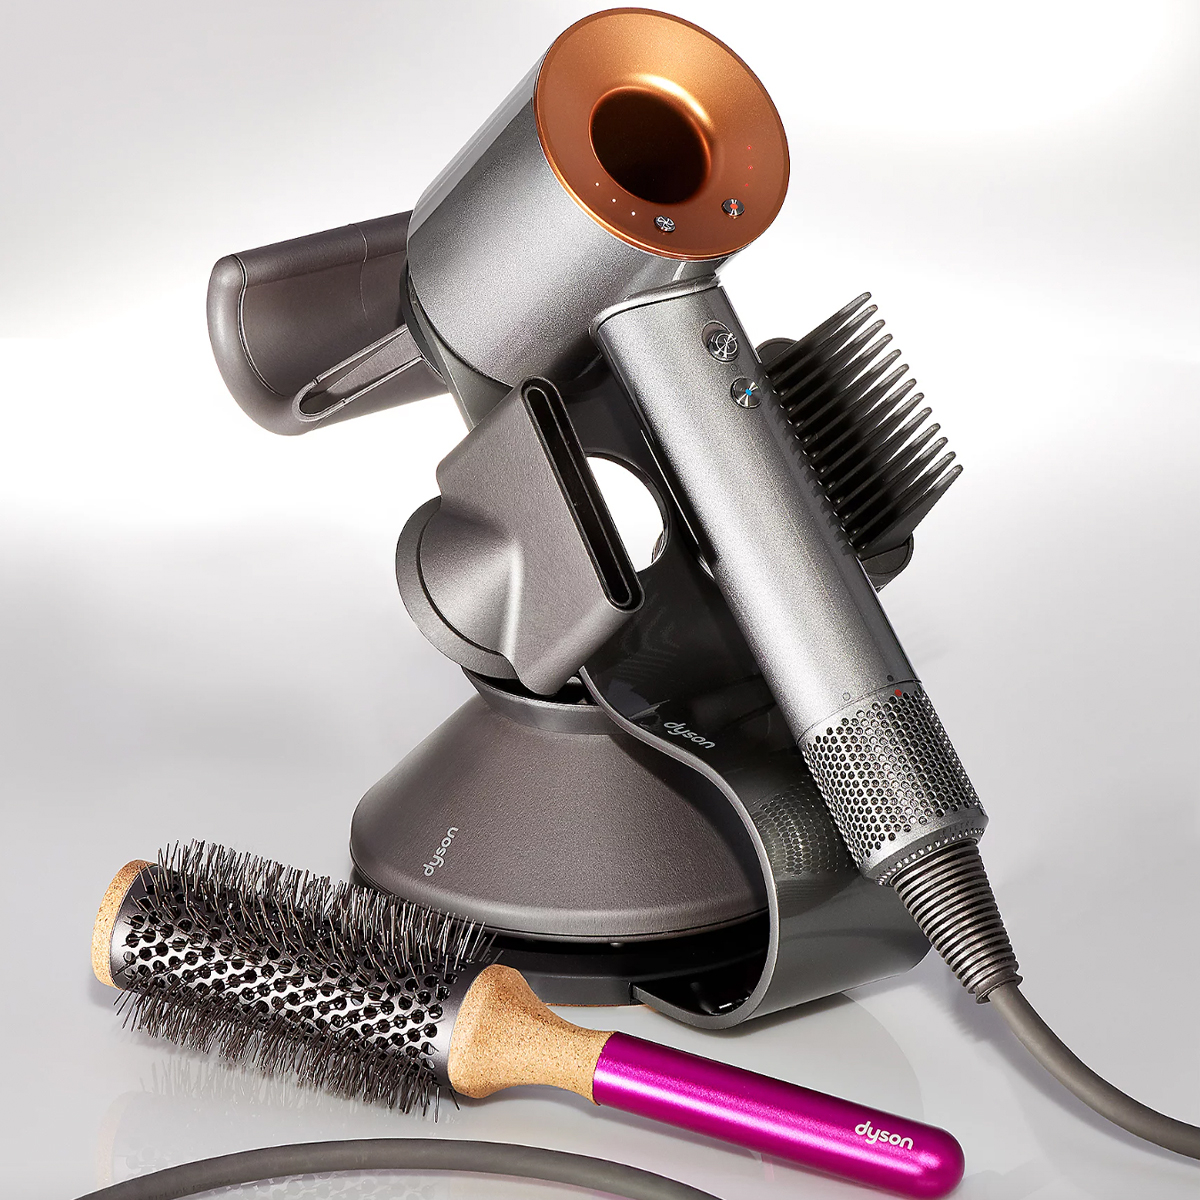 Dyson 24-Hour Deal: Save on a Supersonic Hair Dryer - Online